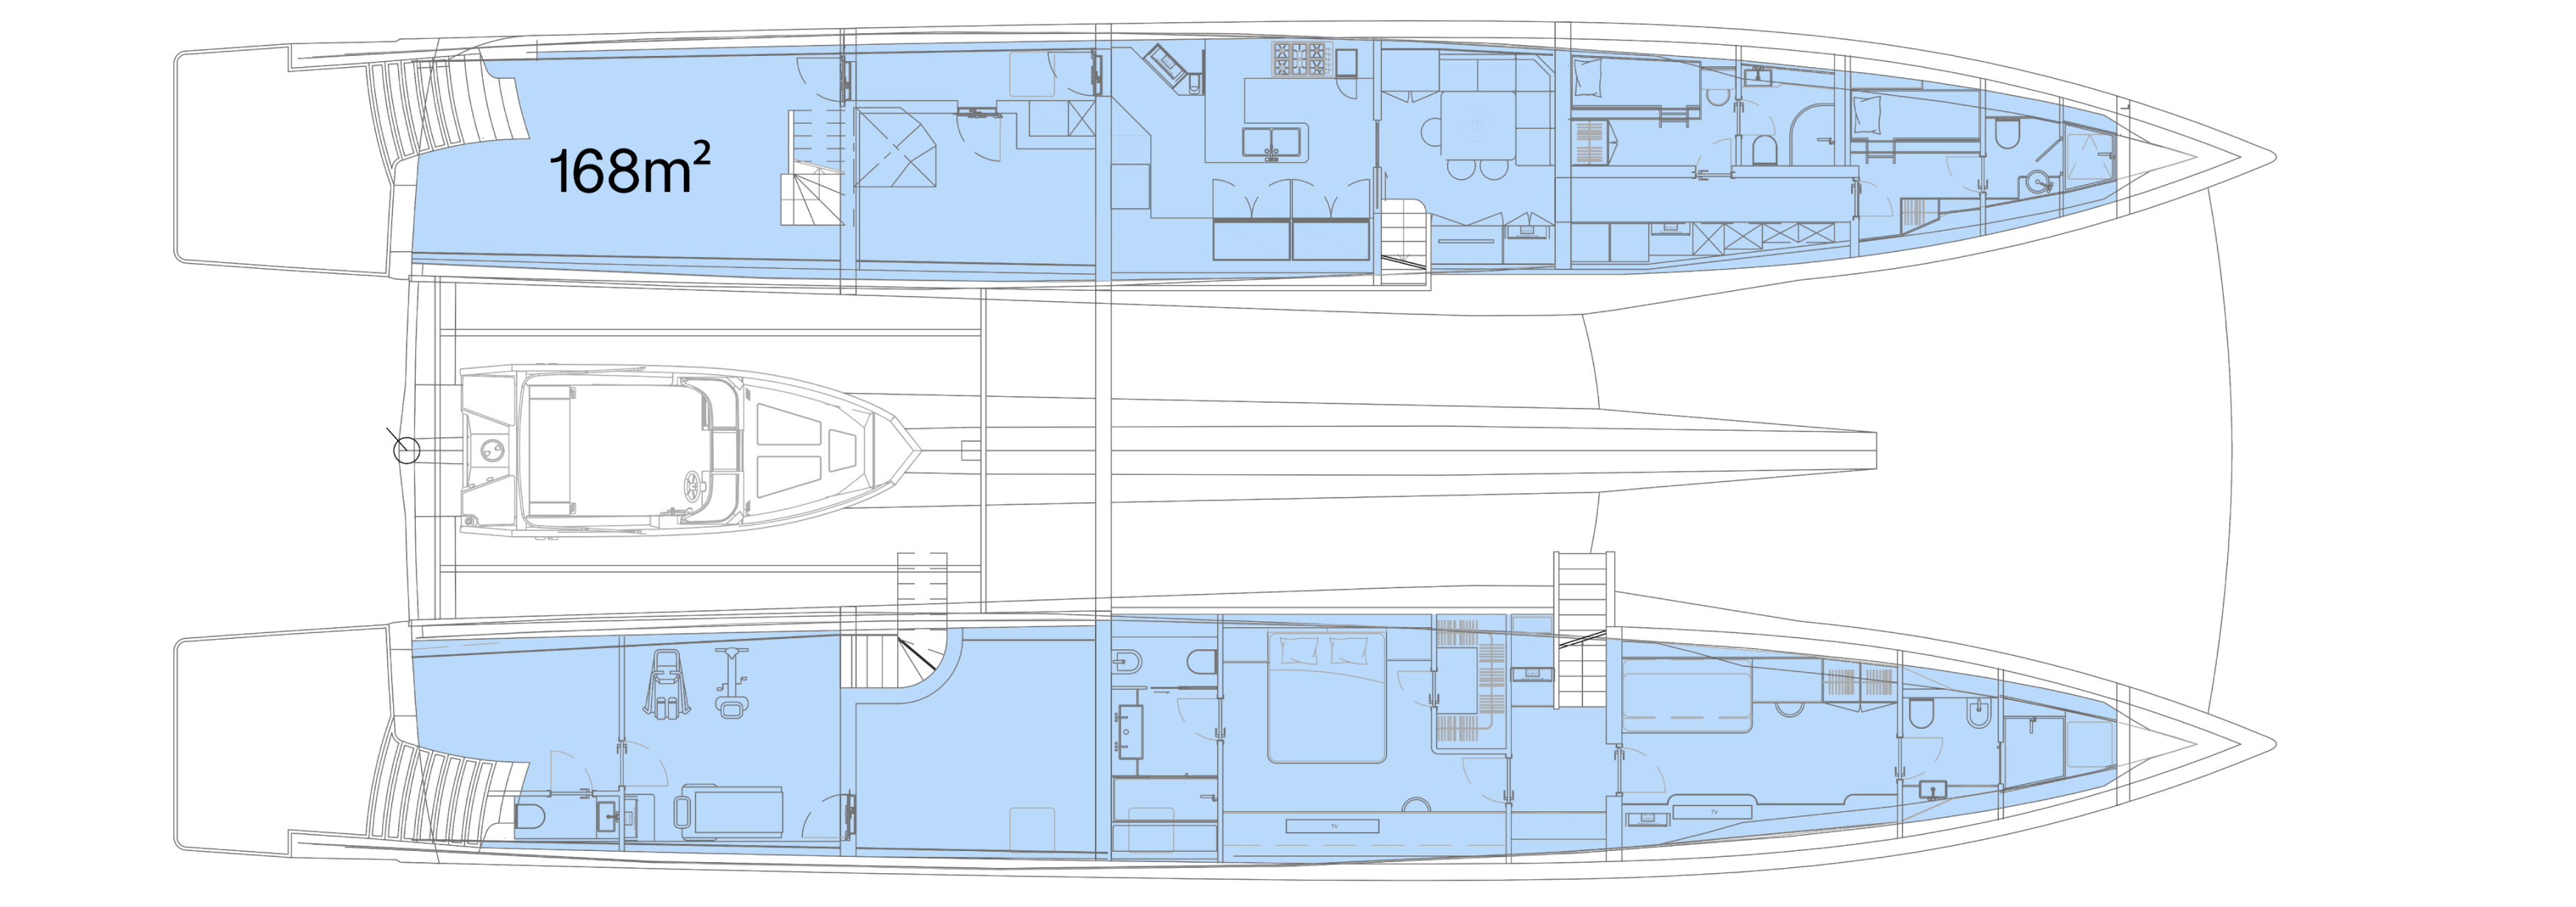 Lower deck plan of a Silent 120 yacht with measures